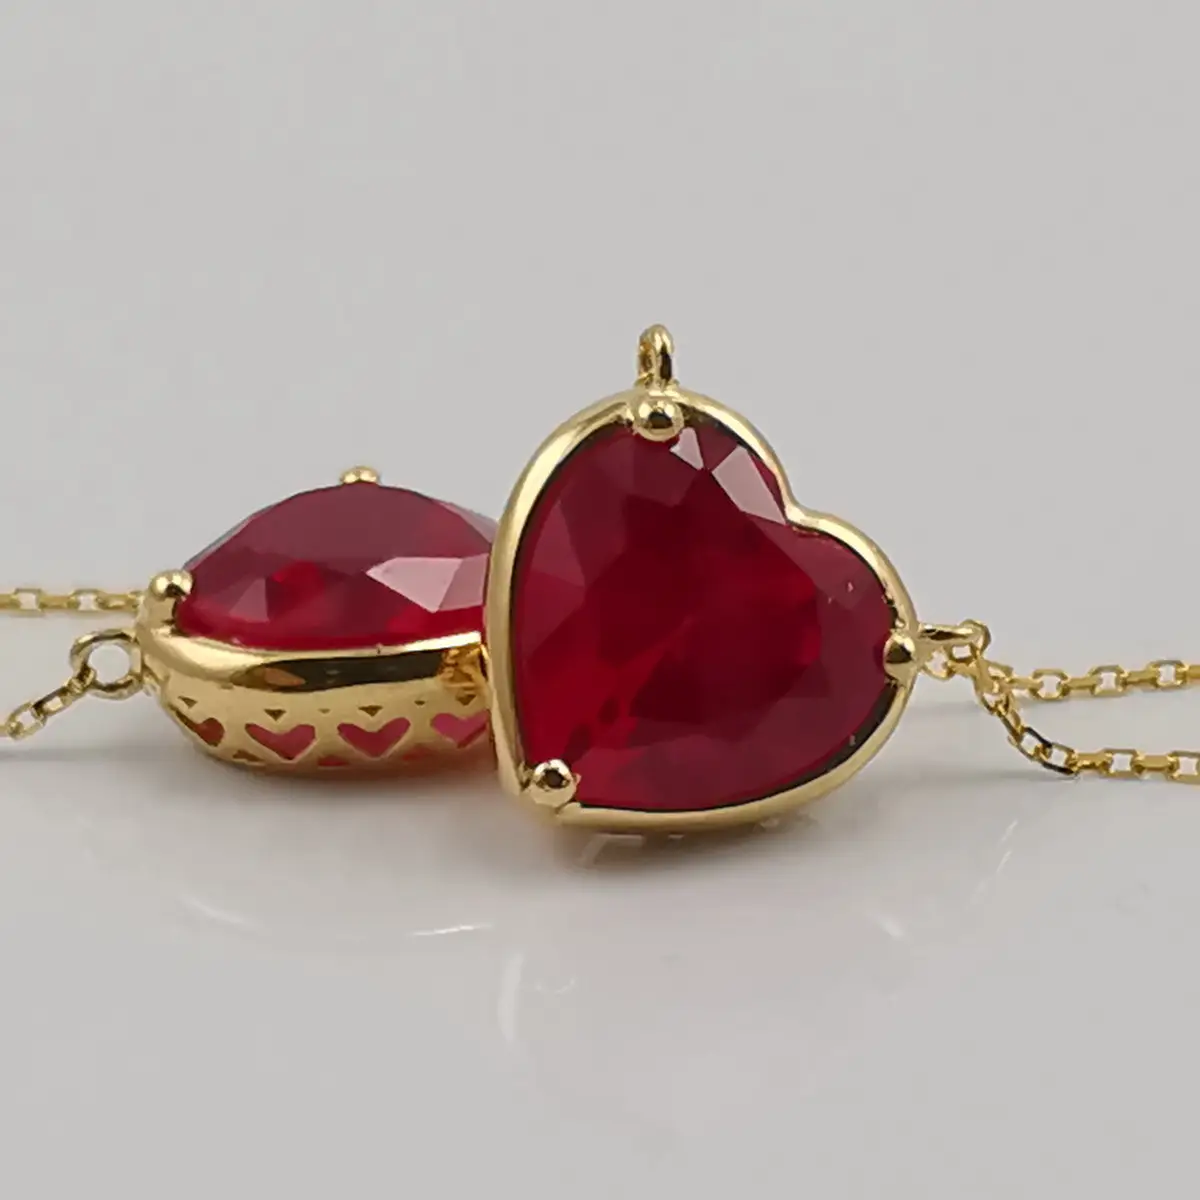 Top quality real solid 18K gold ruby heart shape pendant AU750 fine jewelry gift yellow gold ruby gold O shape necklace pendant